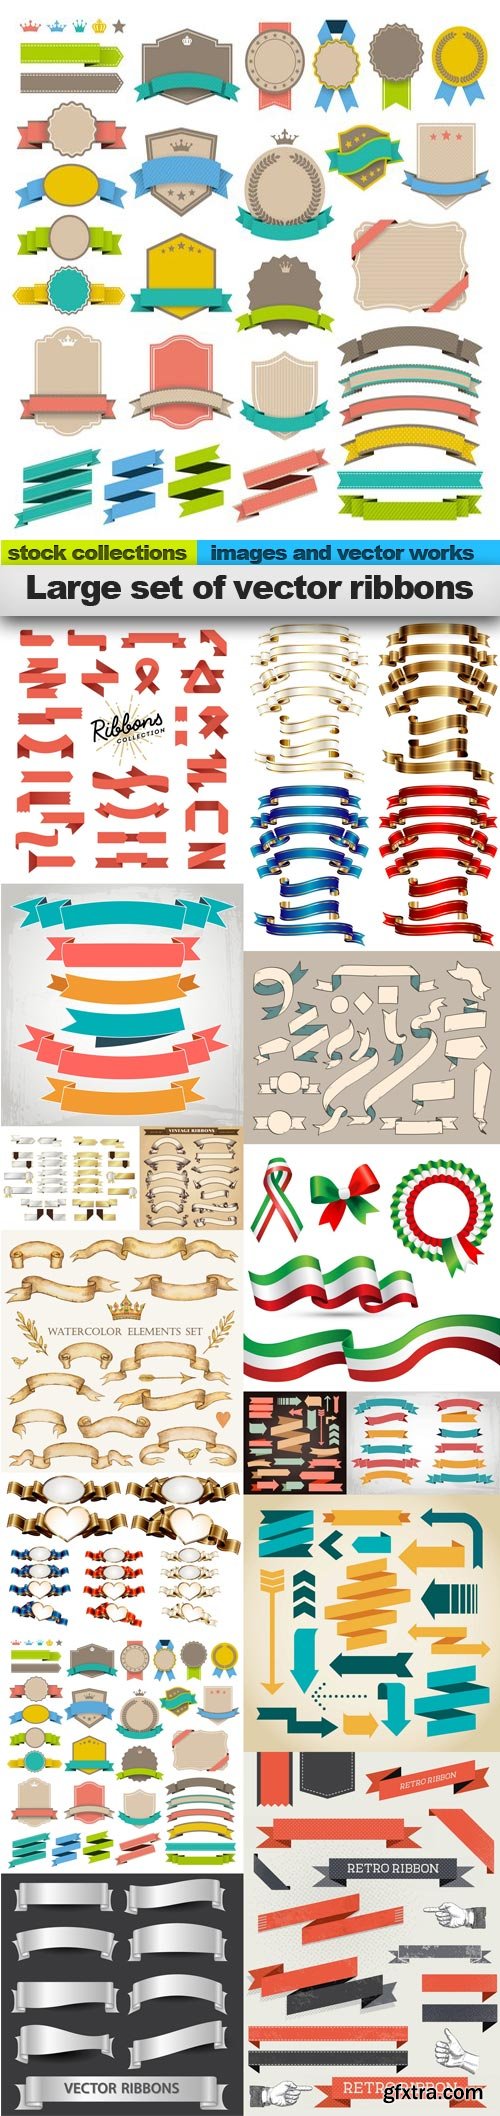 Large set of vector ribbons, 15 x EPS